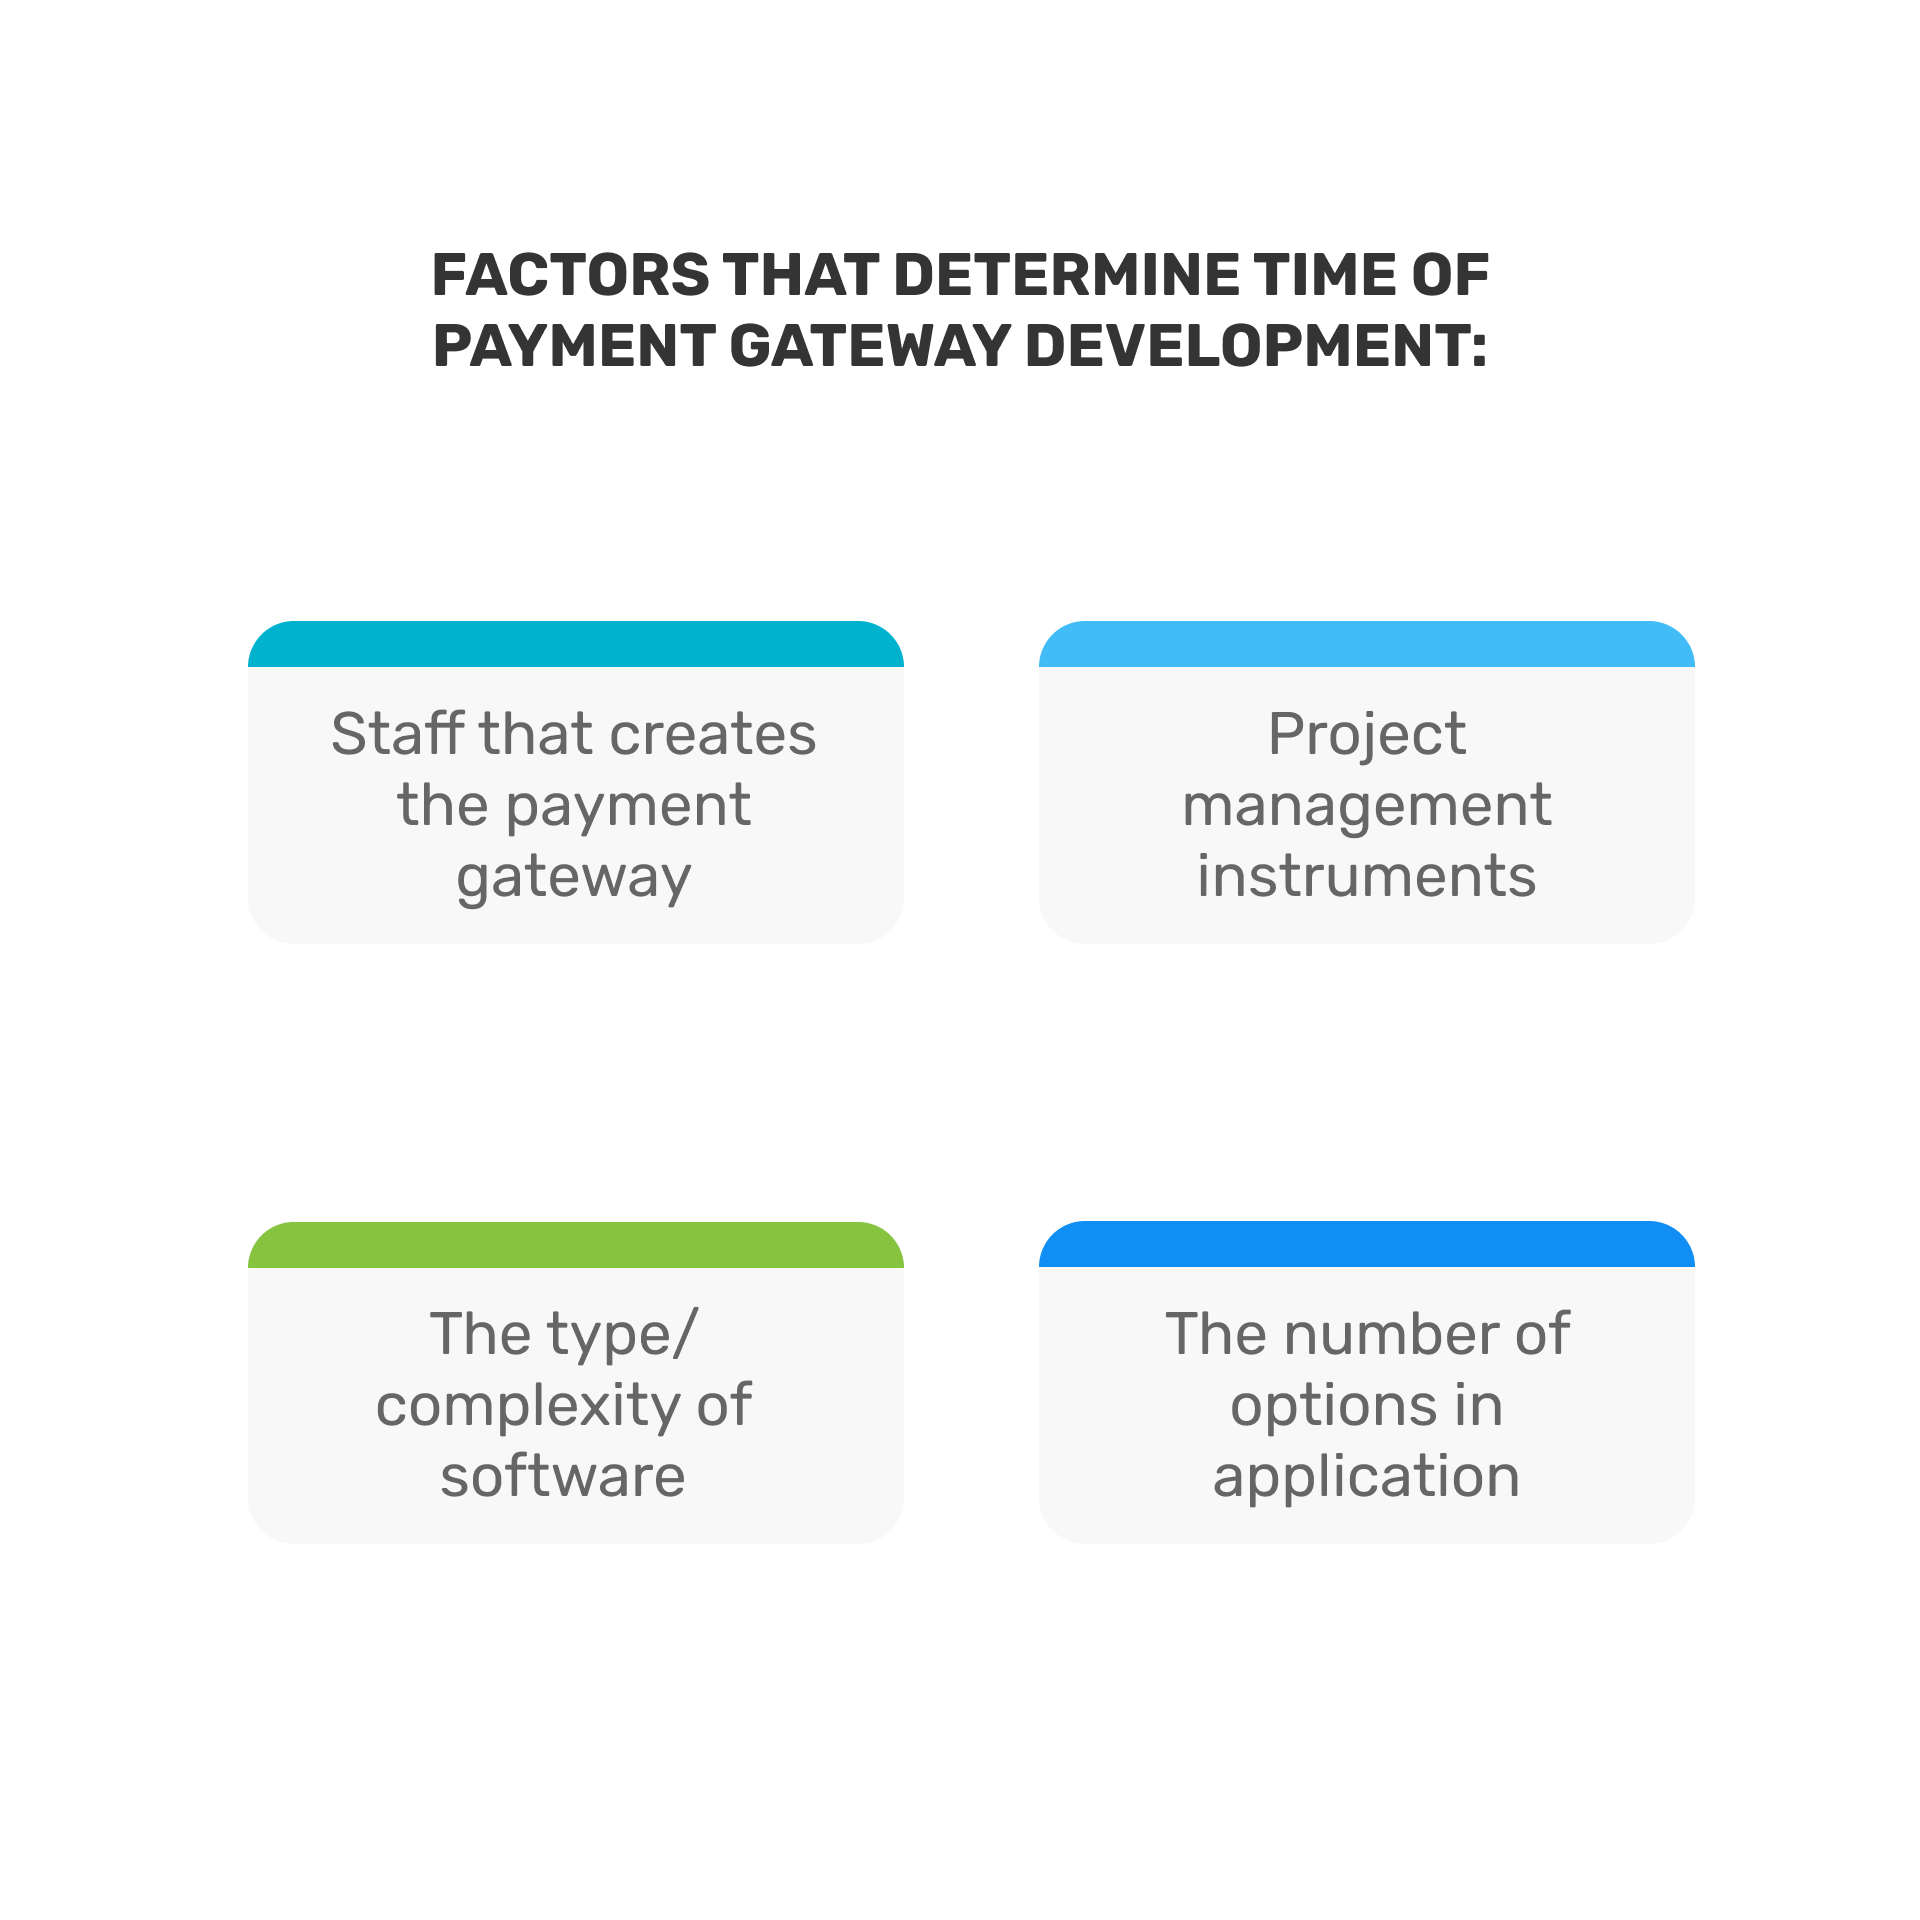 What is the time needed for an average payment gateway development process? We propose rough estimates.